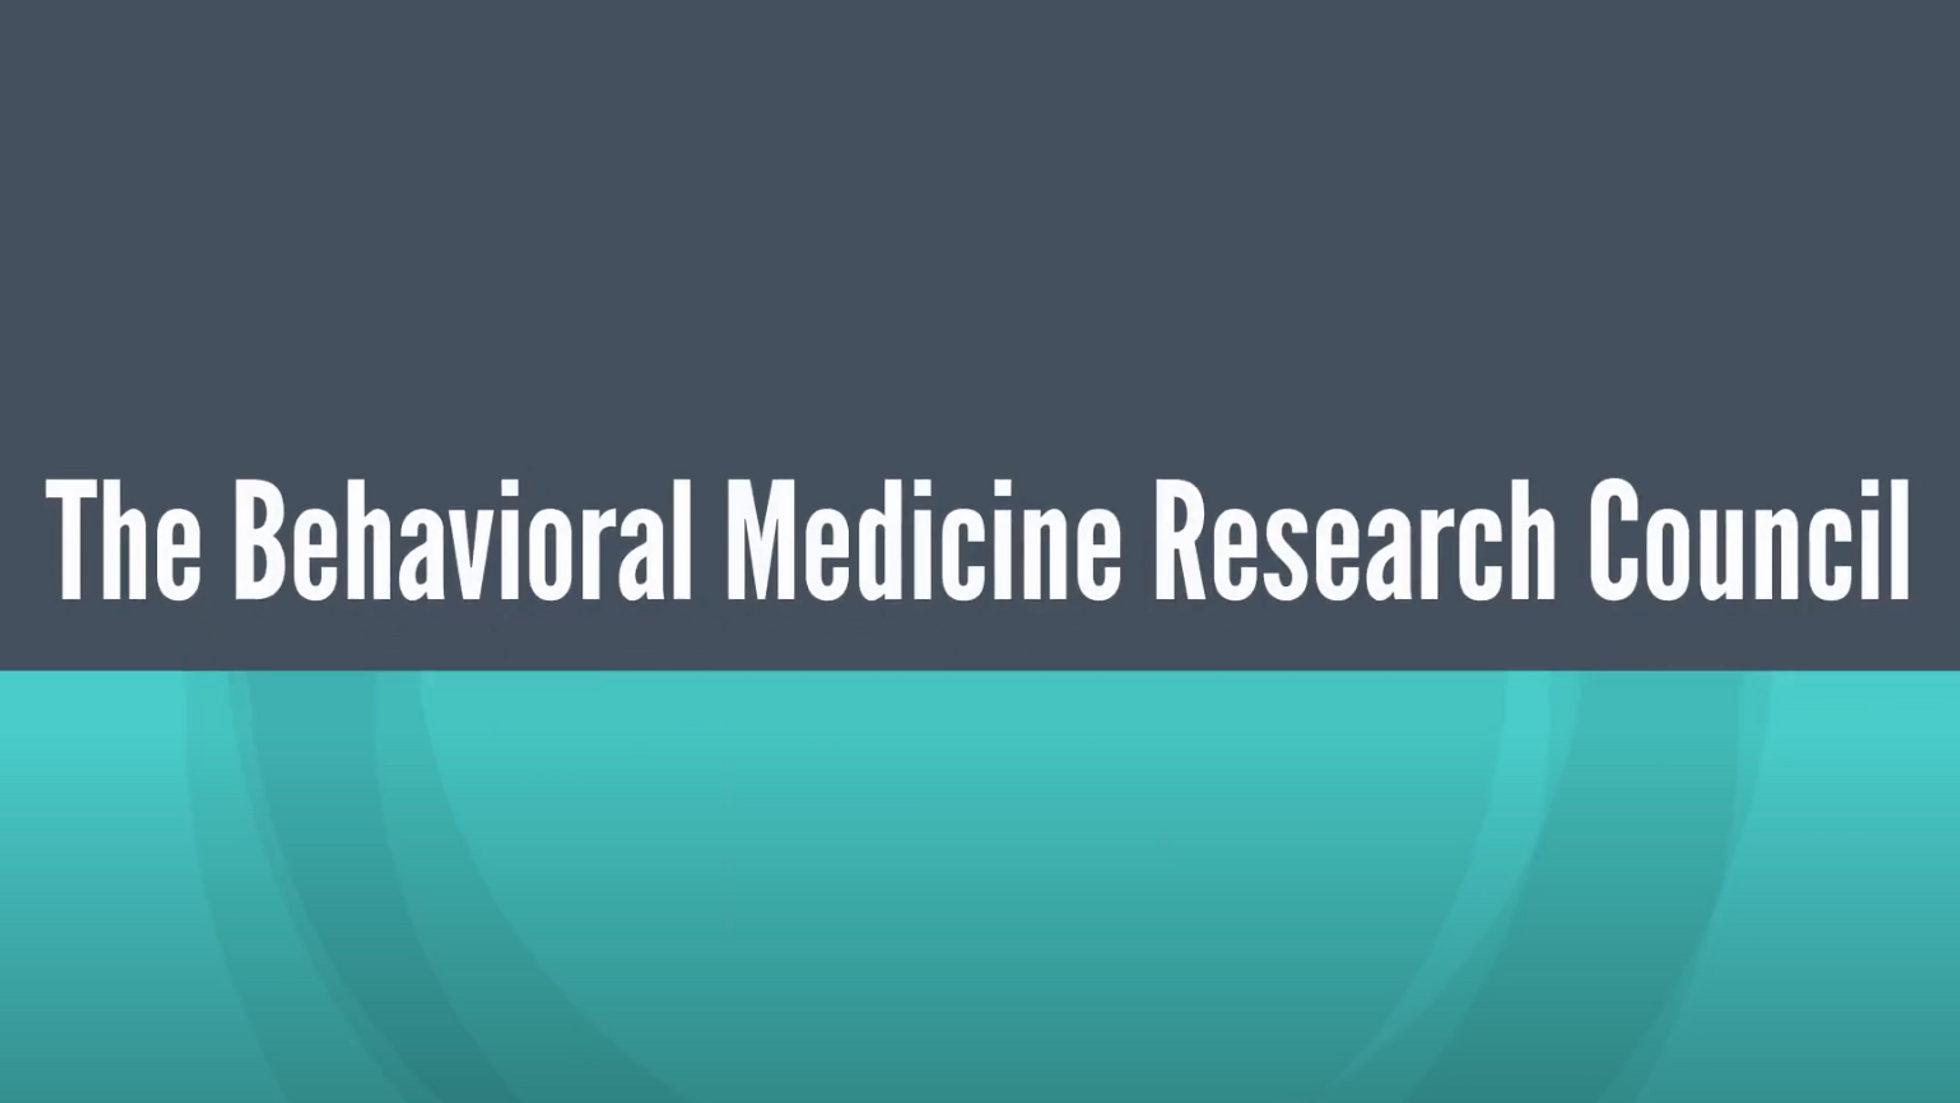 Behavioral Medicine Research Council Overview